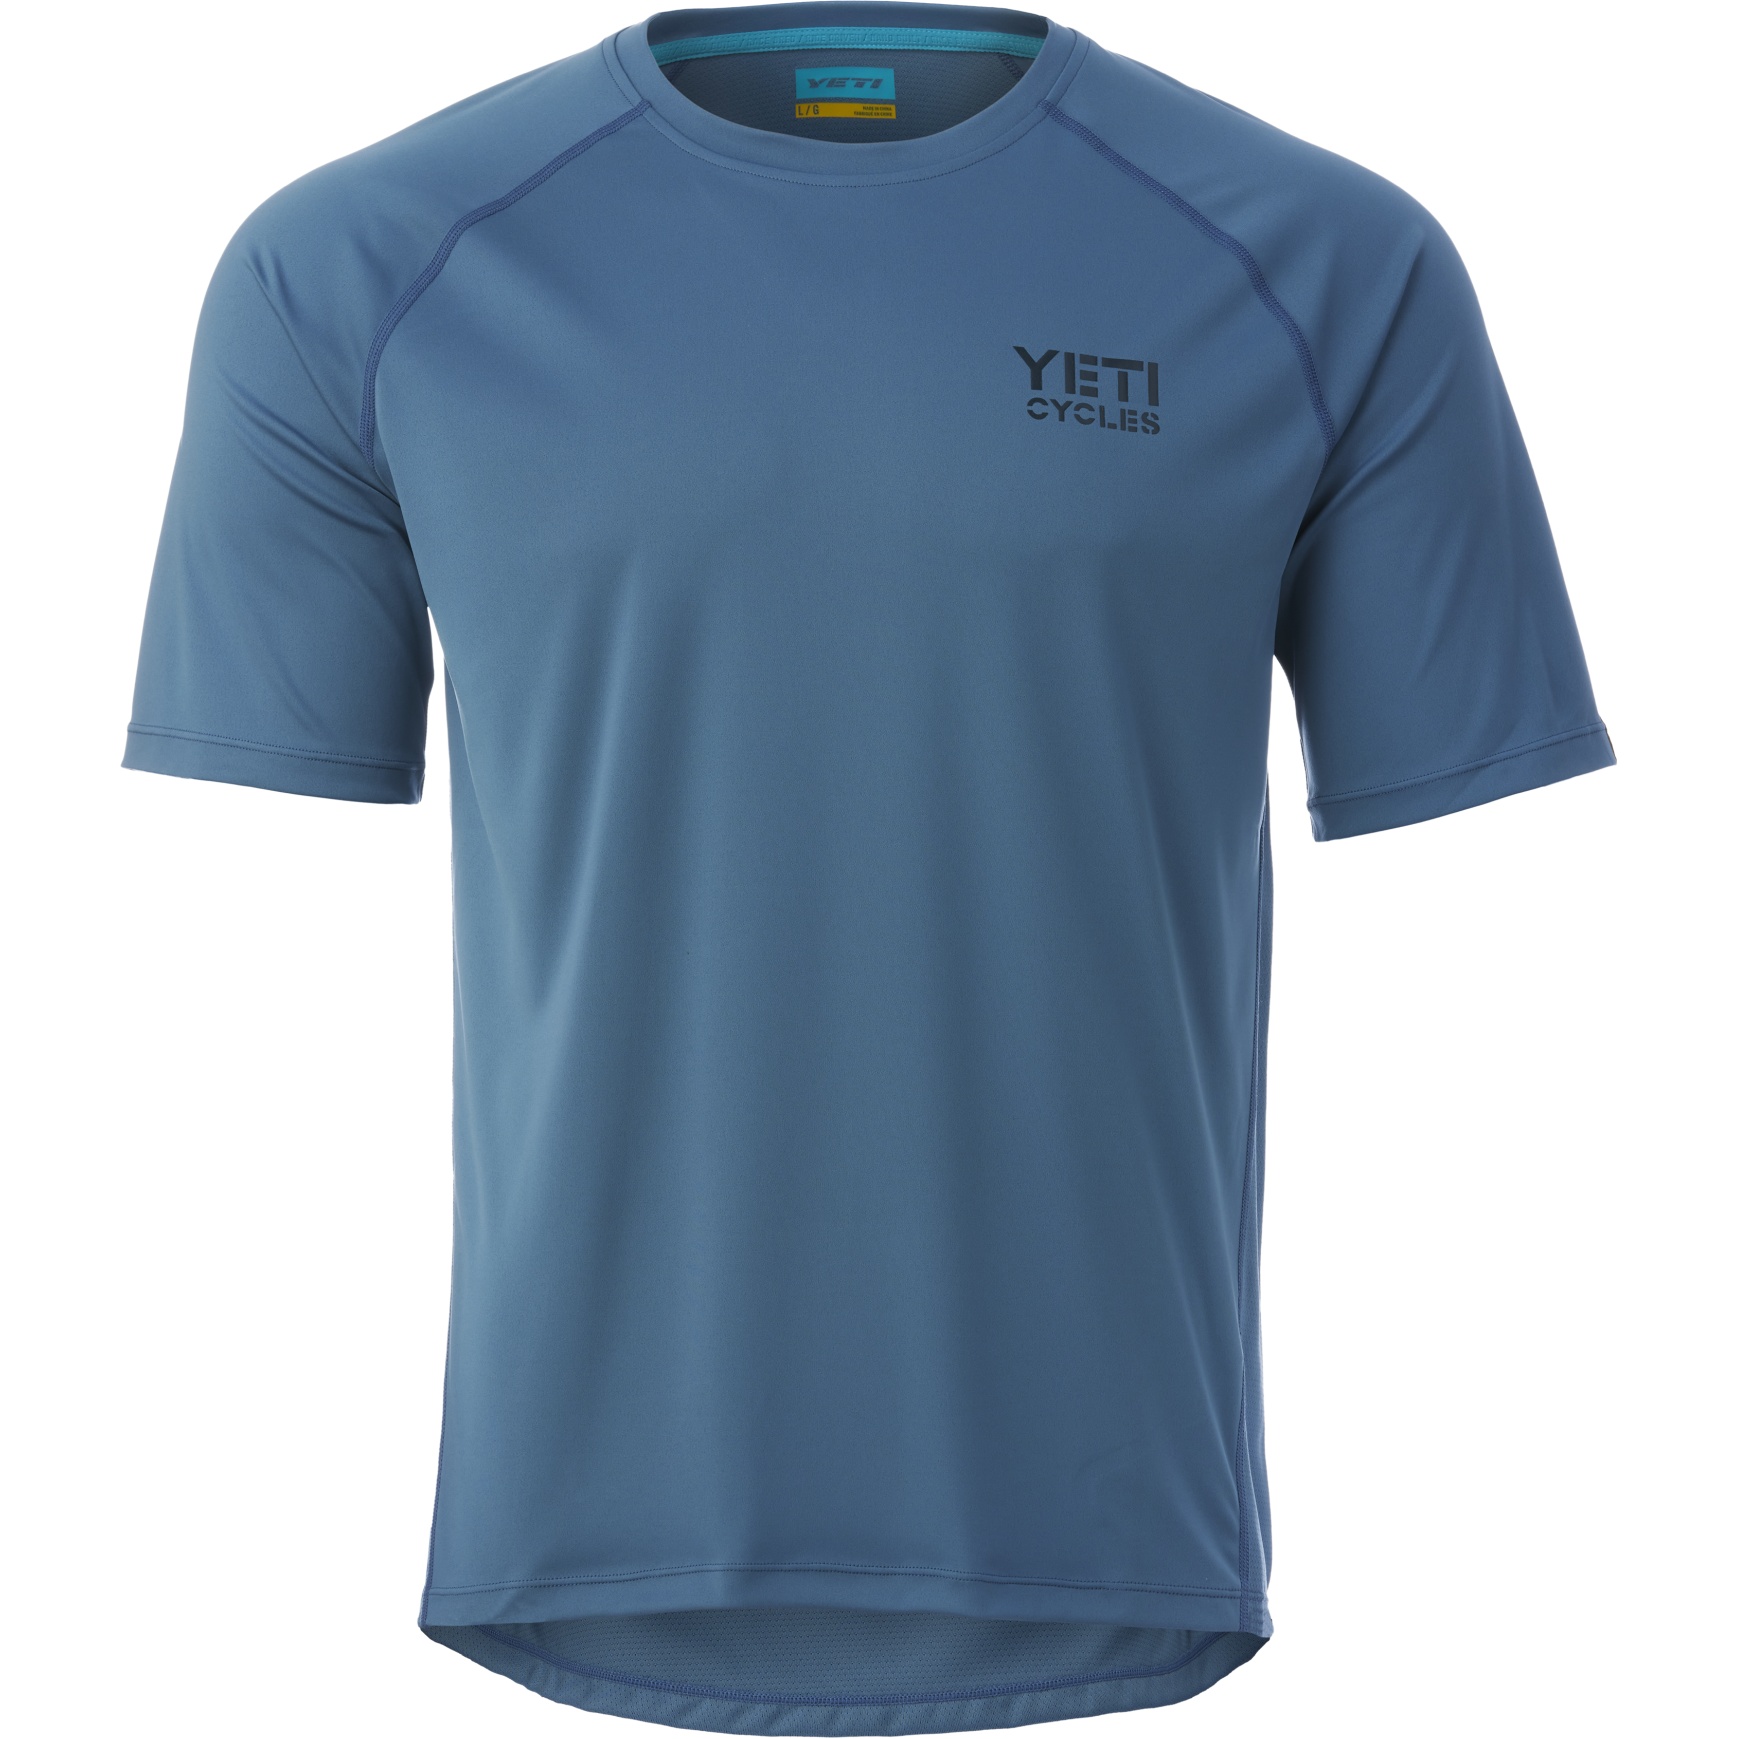 Productfoto van Yeti Cycles Tolland Jersey - Pressure Blue